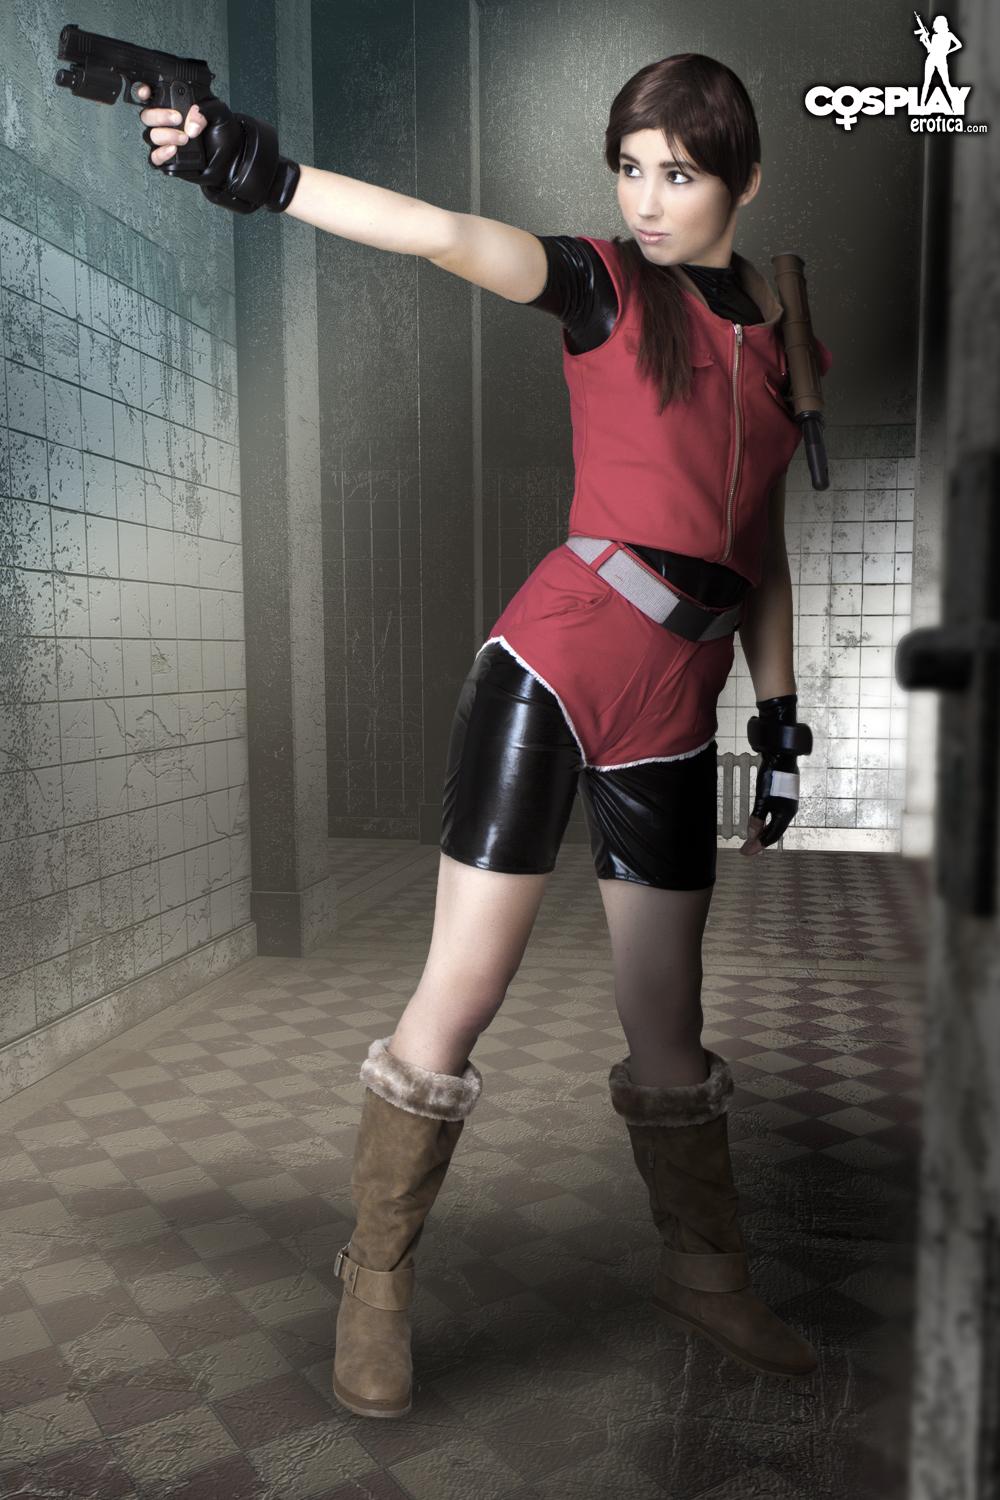 Cosplayer Stacy dresses as Claire from Resident Evil #60007821